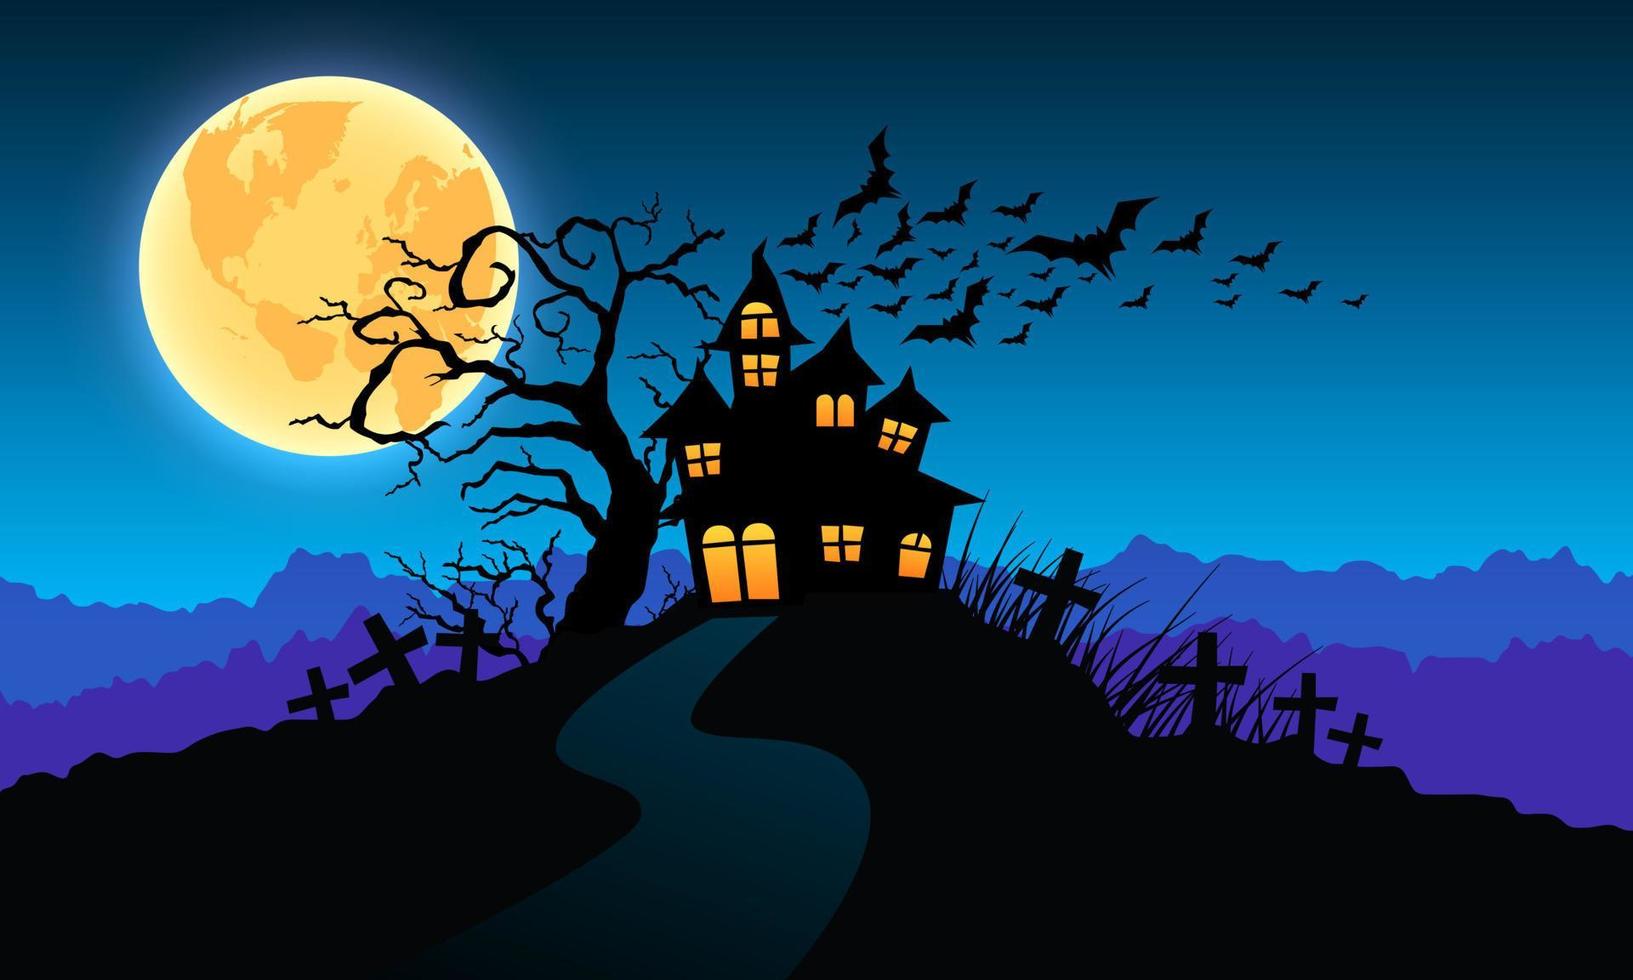 Happy halloween with flying bats full moon, hounted house and cross. vector illustration.